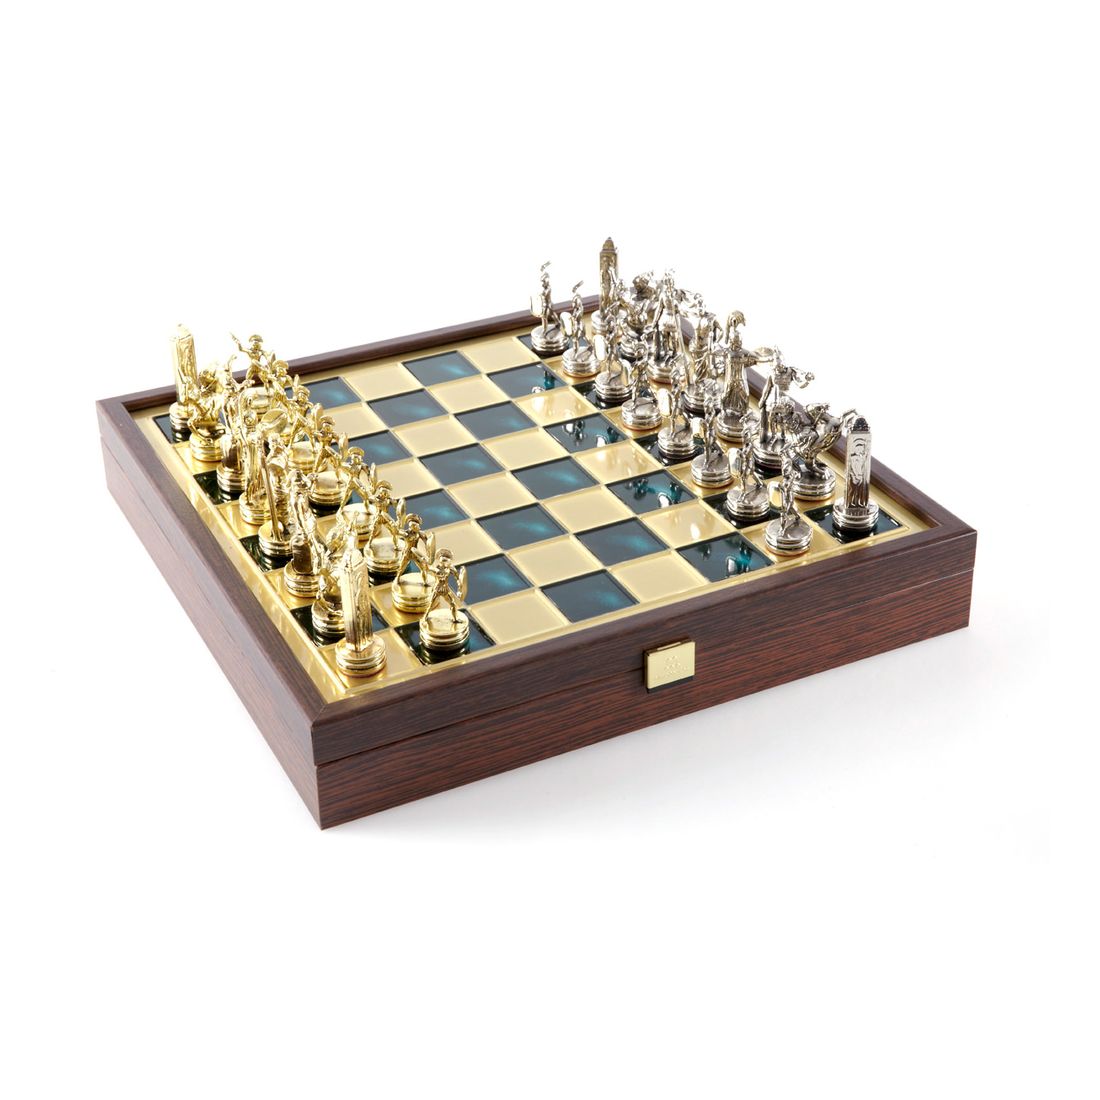 Manopoulos Chess Set Greek Mythology - Green Chessboard in Wooden Box with Gold/Silver Chessmen - Medium (34 x 34 cm)